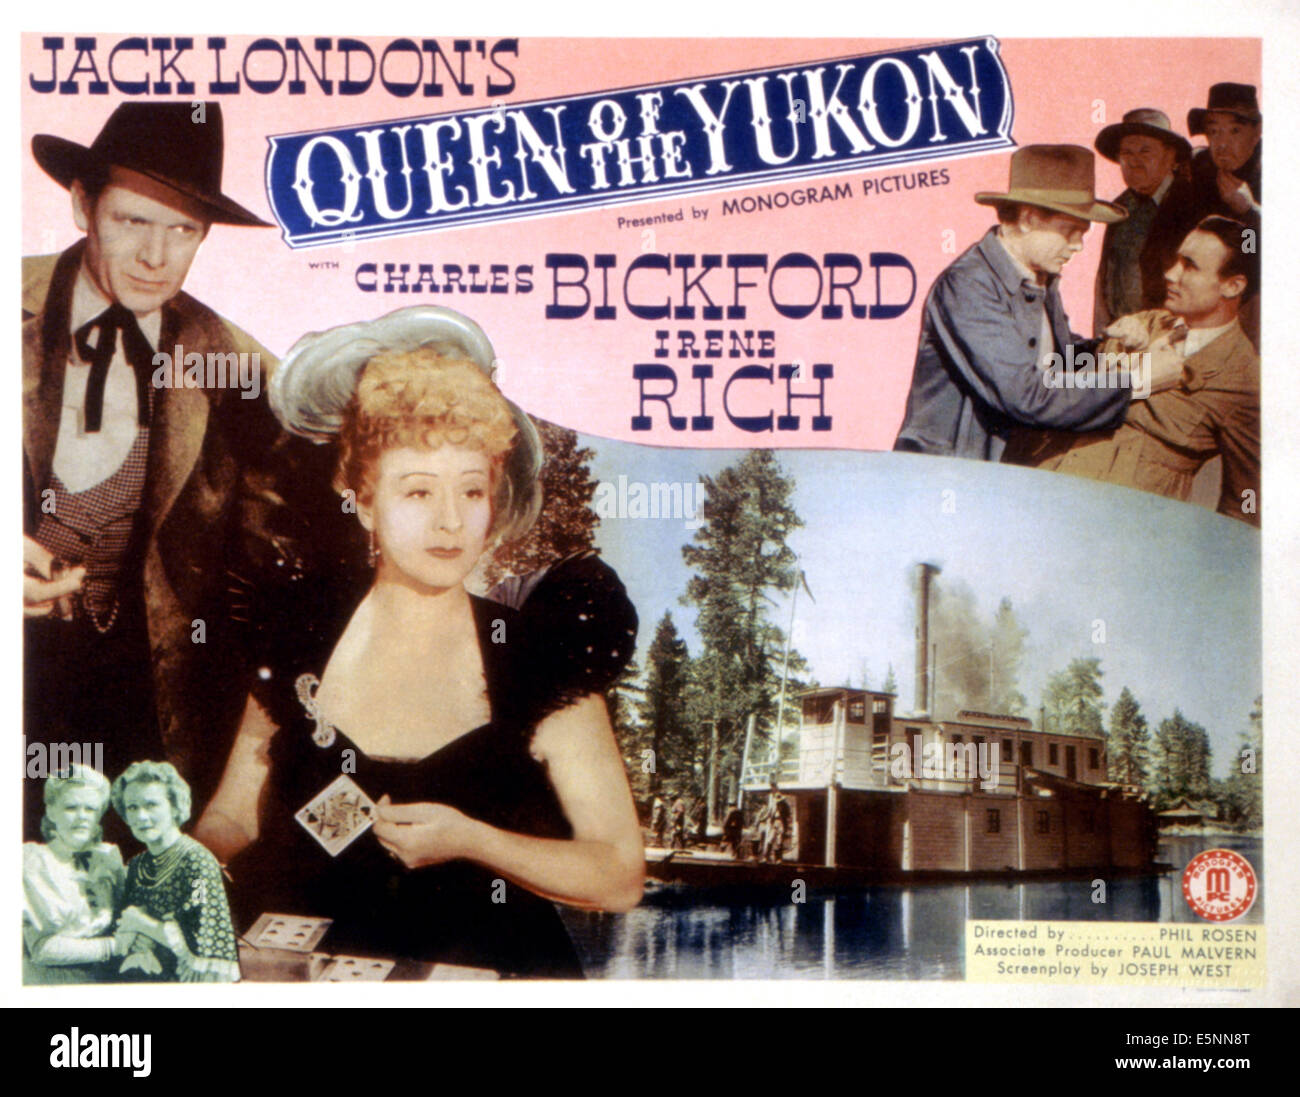 QUEEN OF THE YUKON, Charles Bickford, June Carlson, Irene Rich, Dave O'Brien, George Cleveland, Guy Usher, 1940 Stock Photo